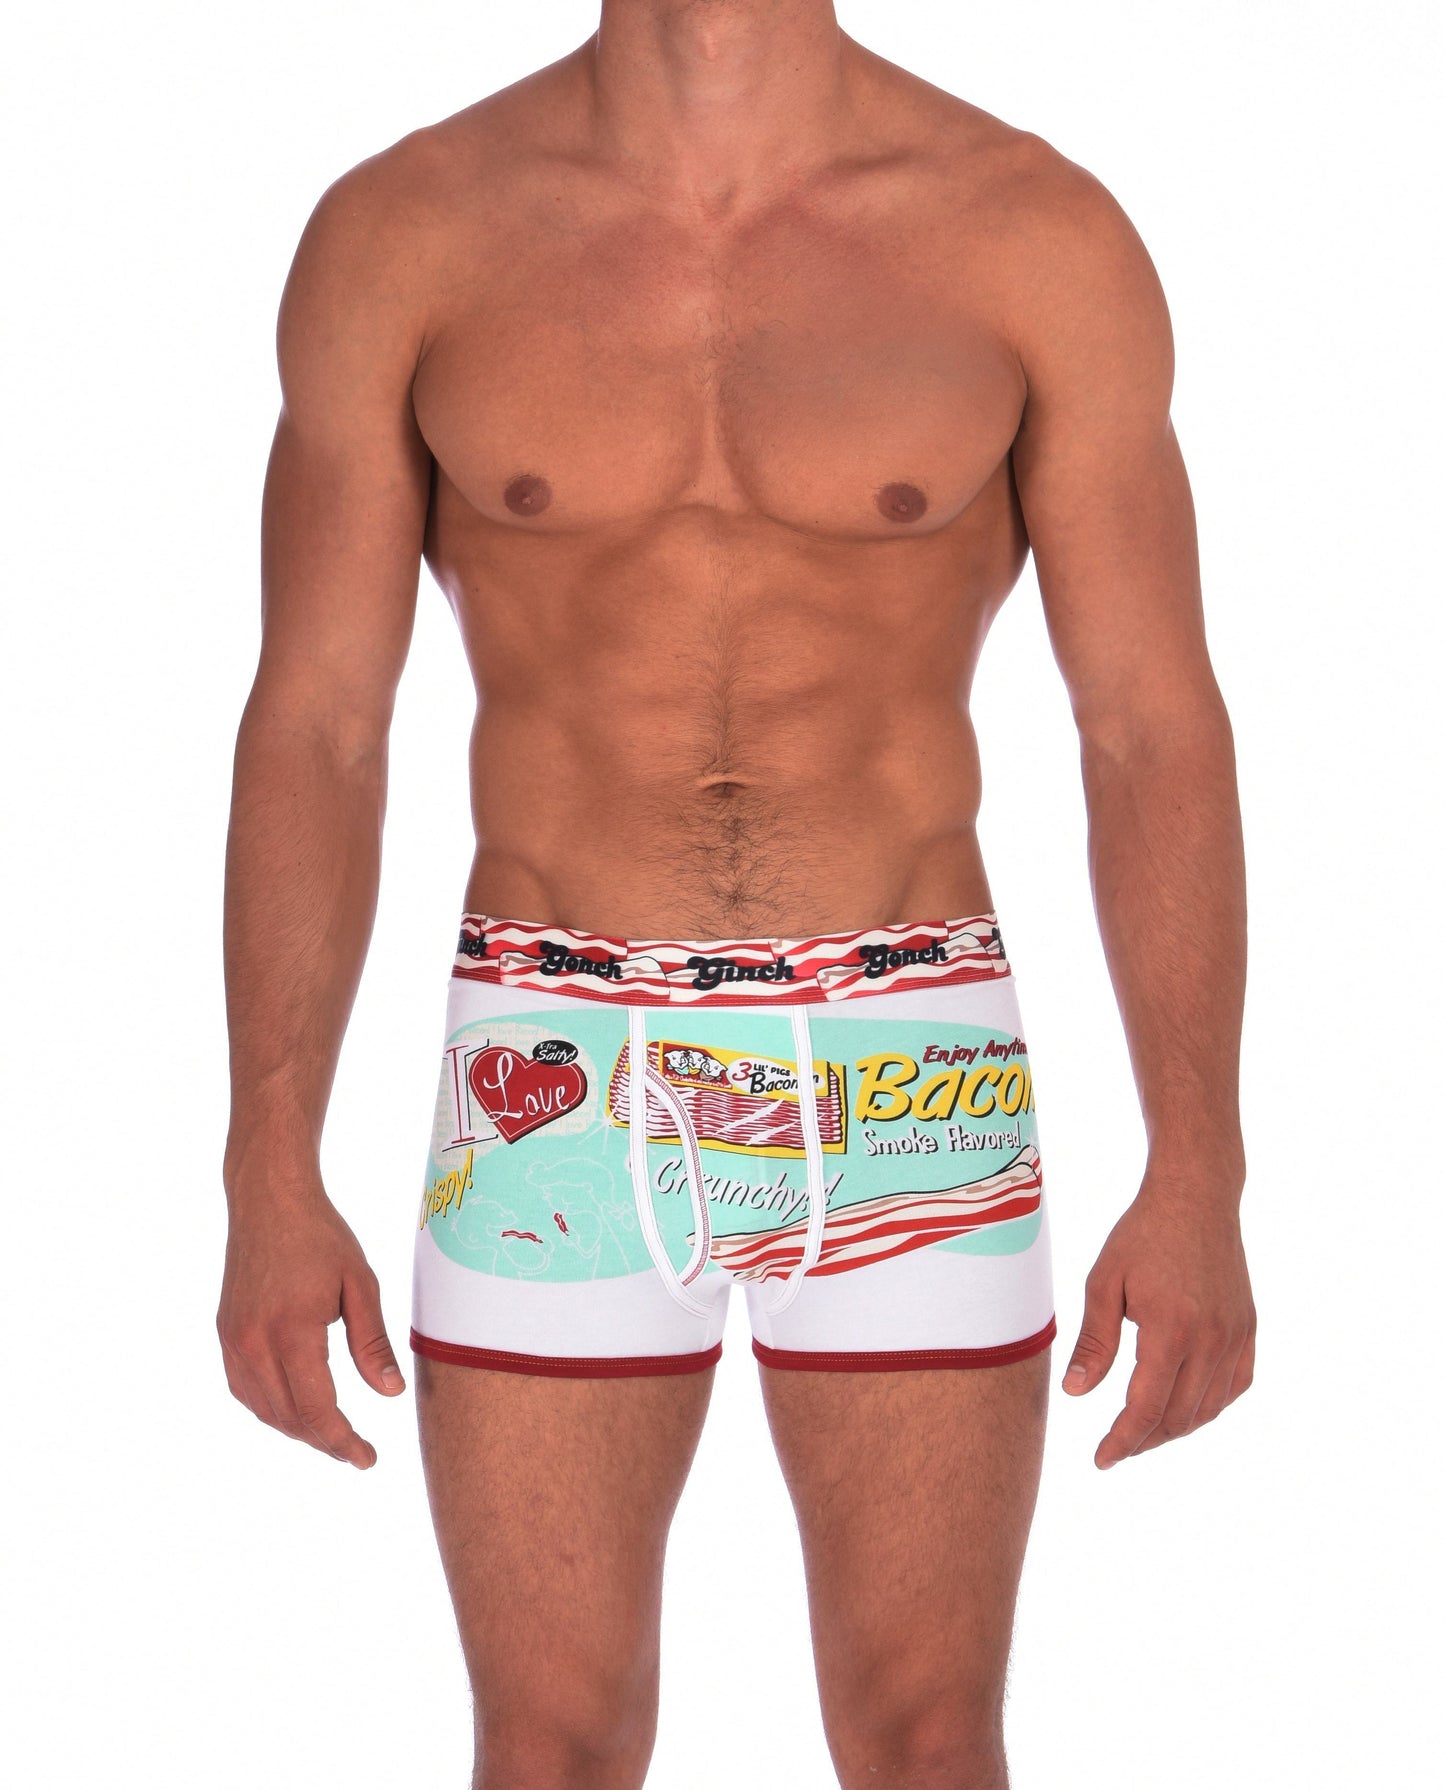 I Love Bacon Trunk Boxer Brief Ginch Gonch Men's underwear with white teal and bacon detail red trim front bacon waistband